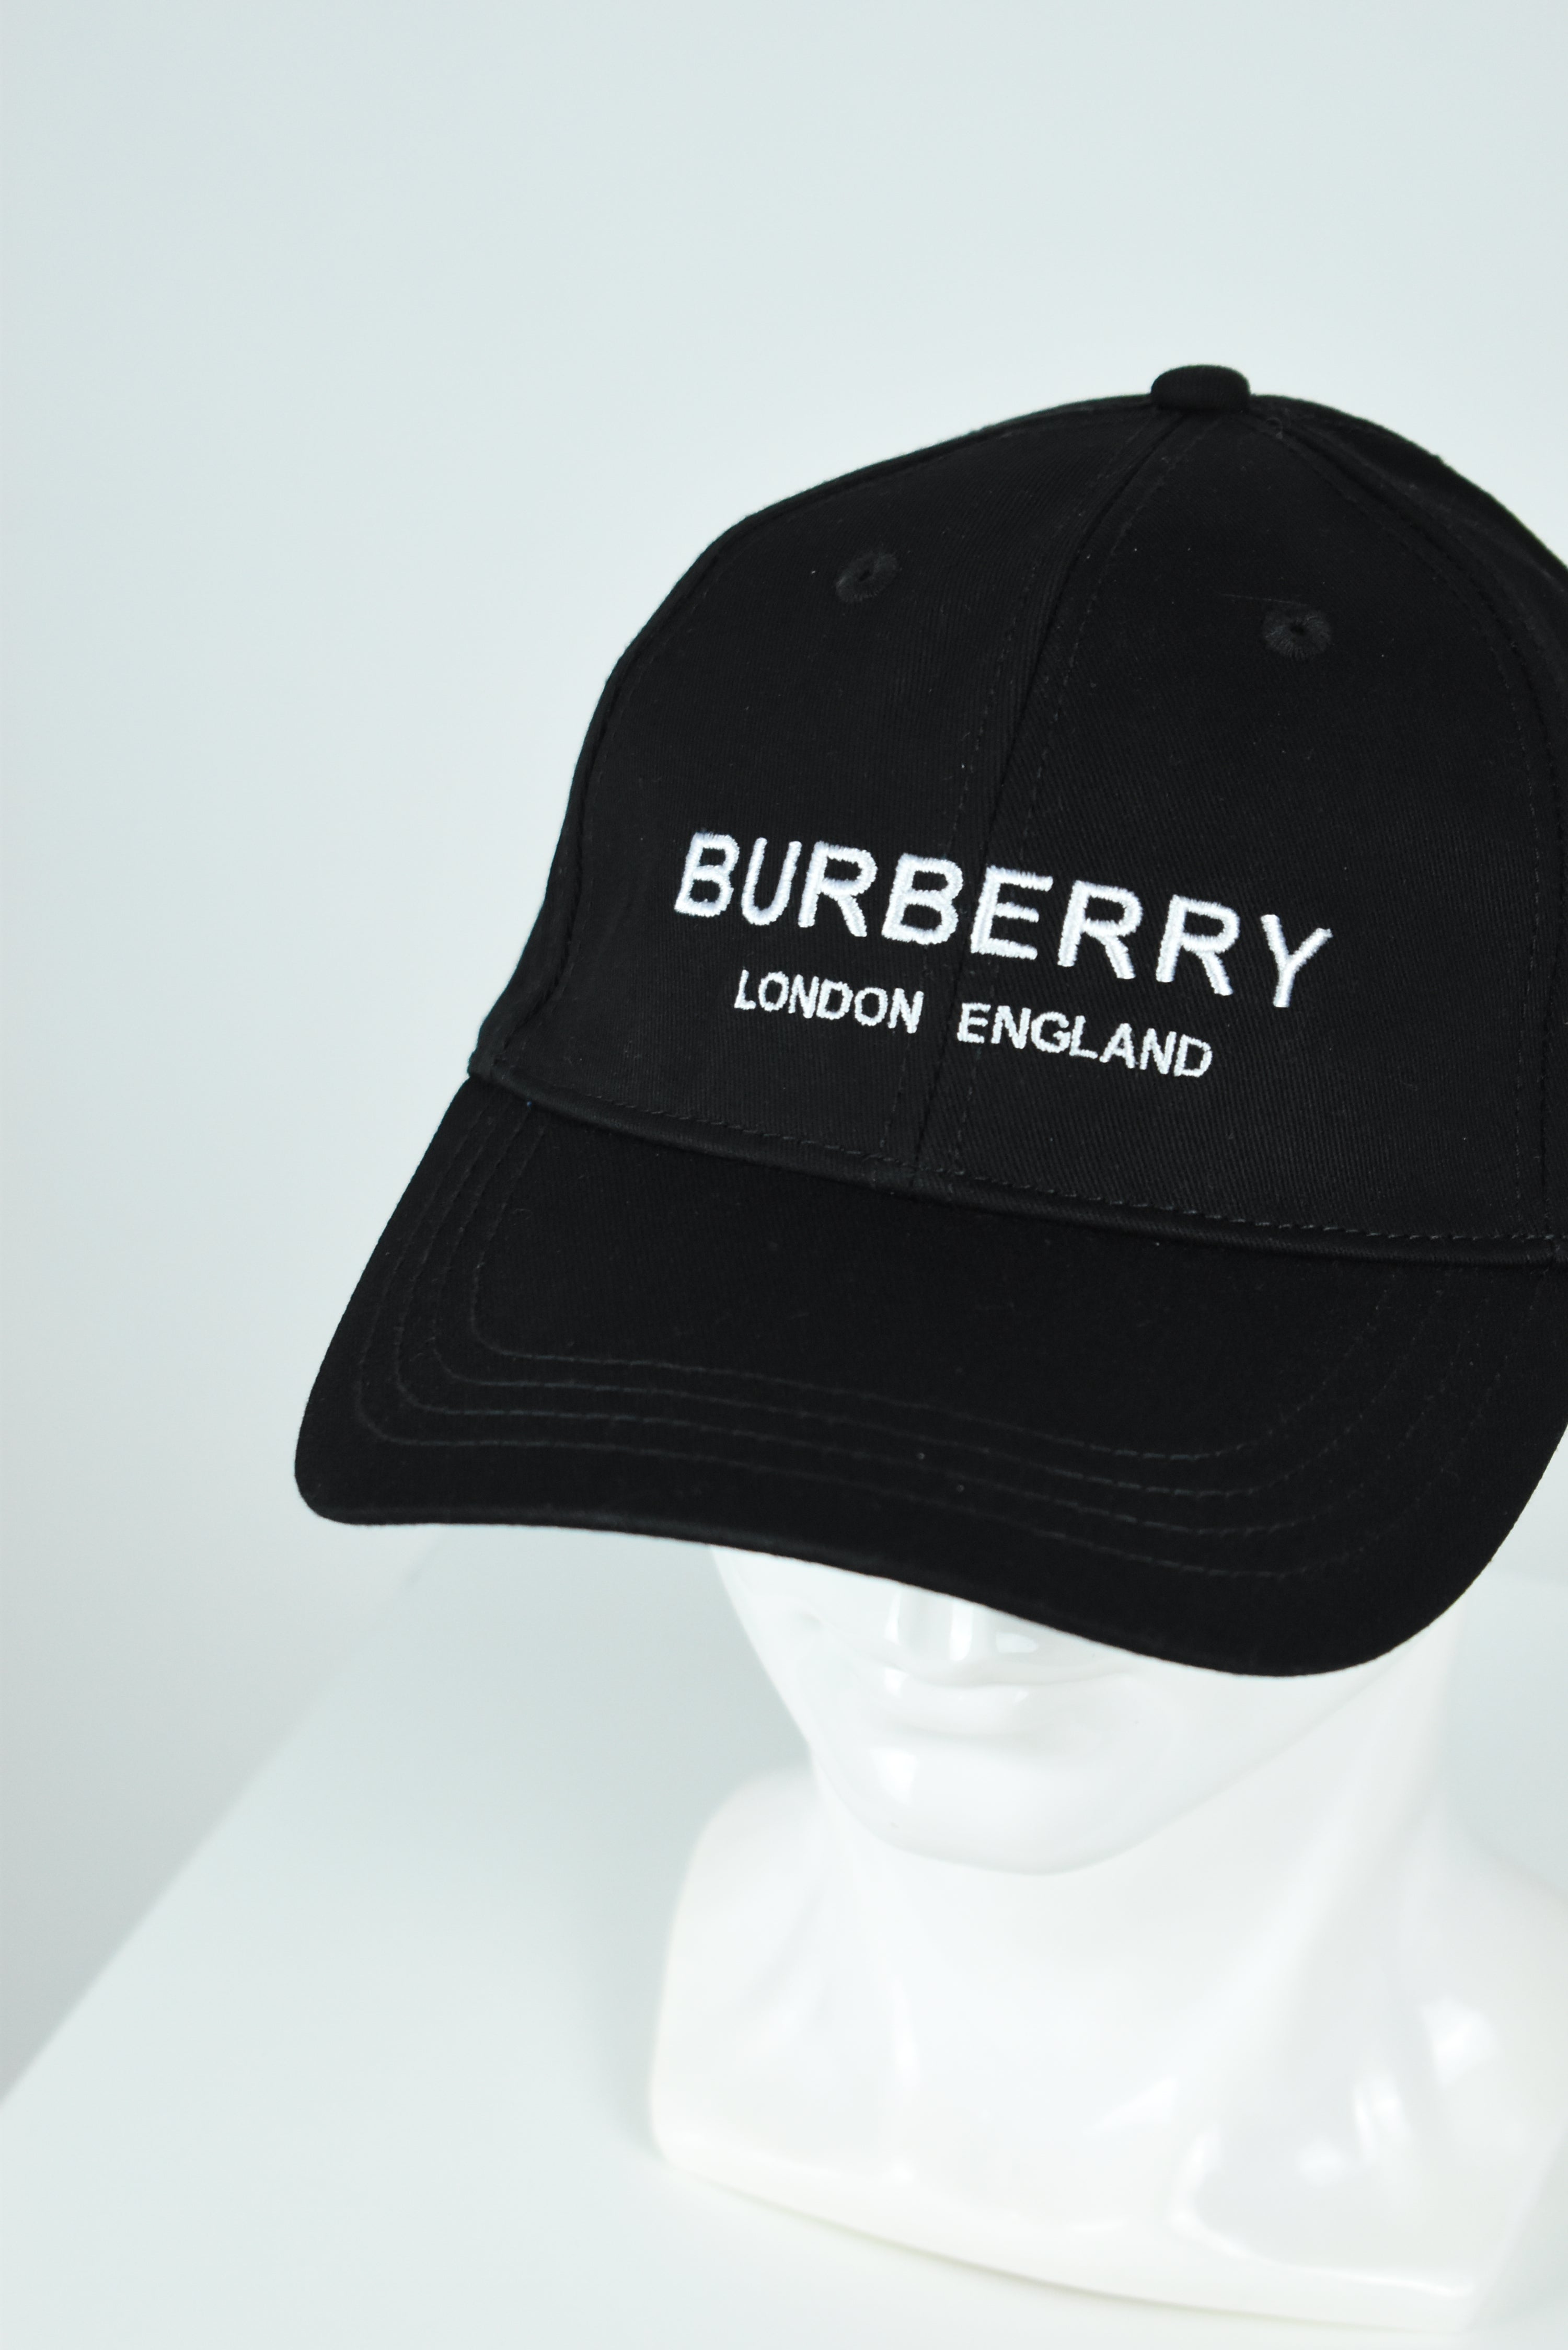 New Burberry Embroidery Cap Black OS